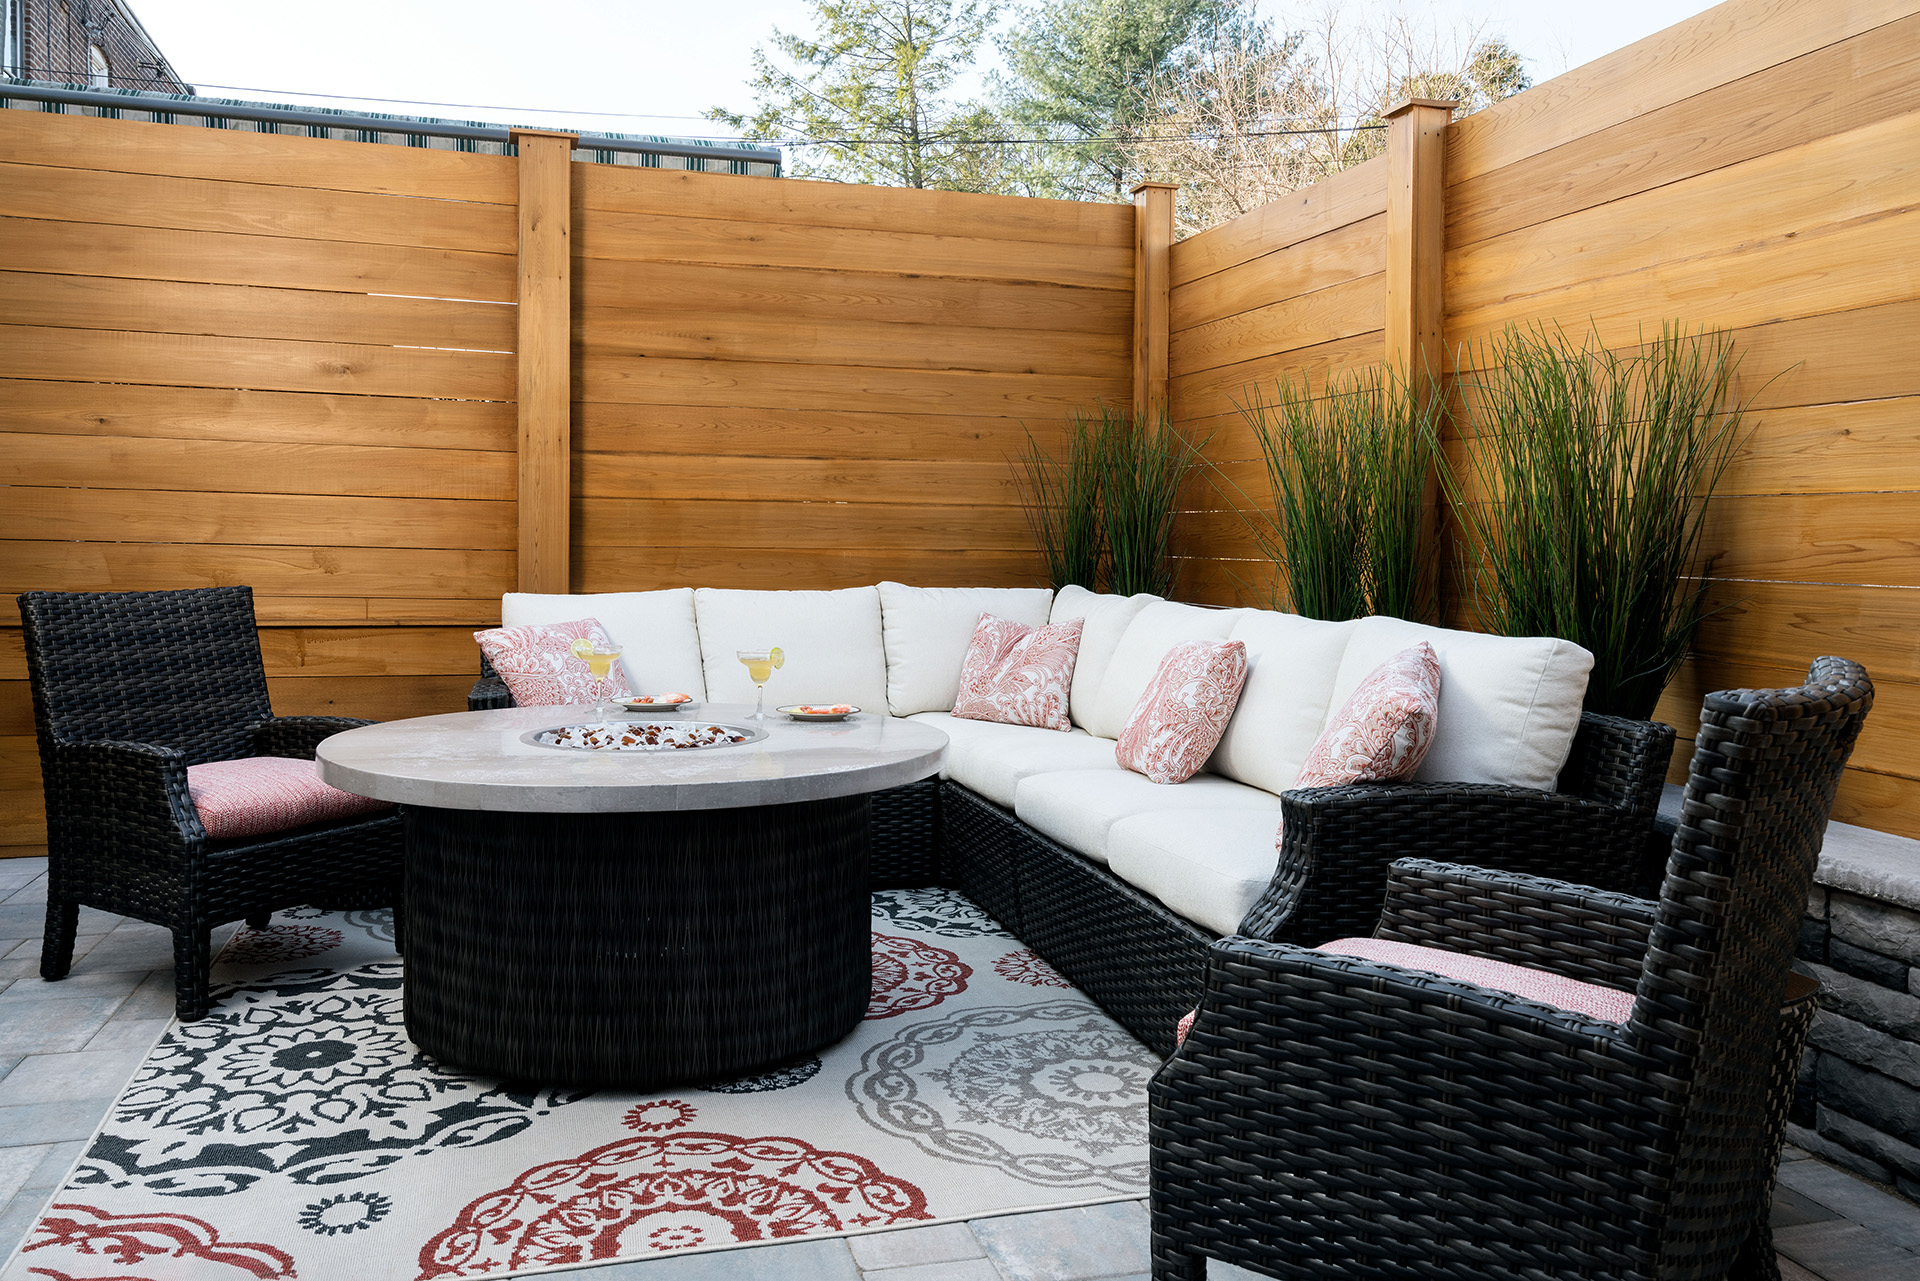 Creating an Inviting Outdoor Space!